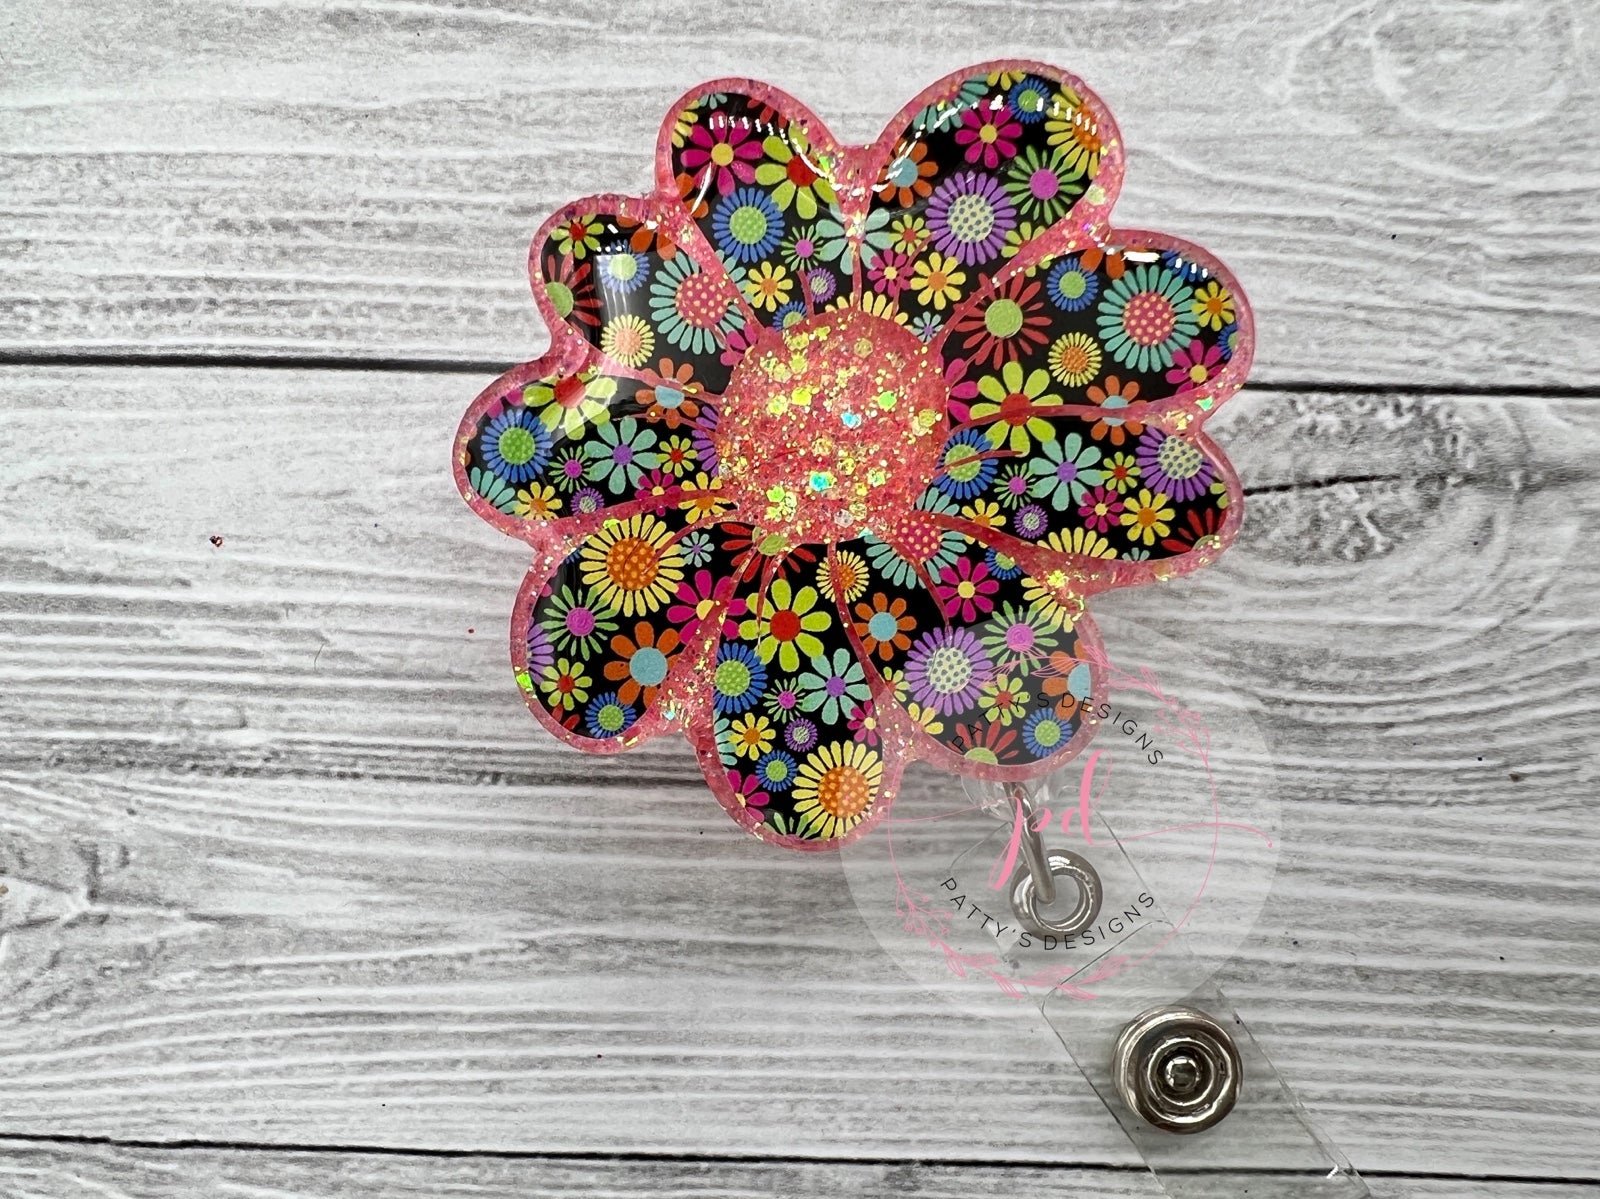 Flower Power Daisy Badge Reel (Price is Firm, No Offers